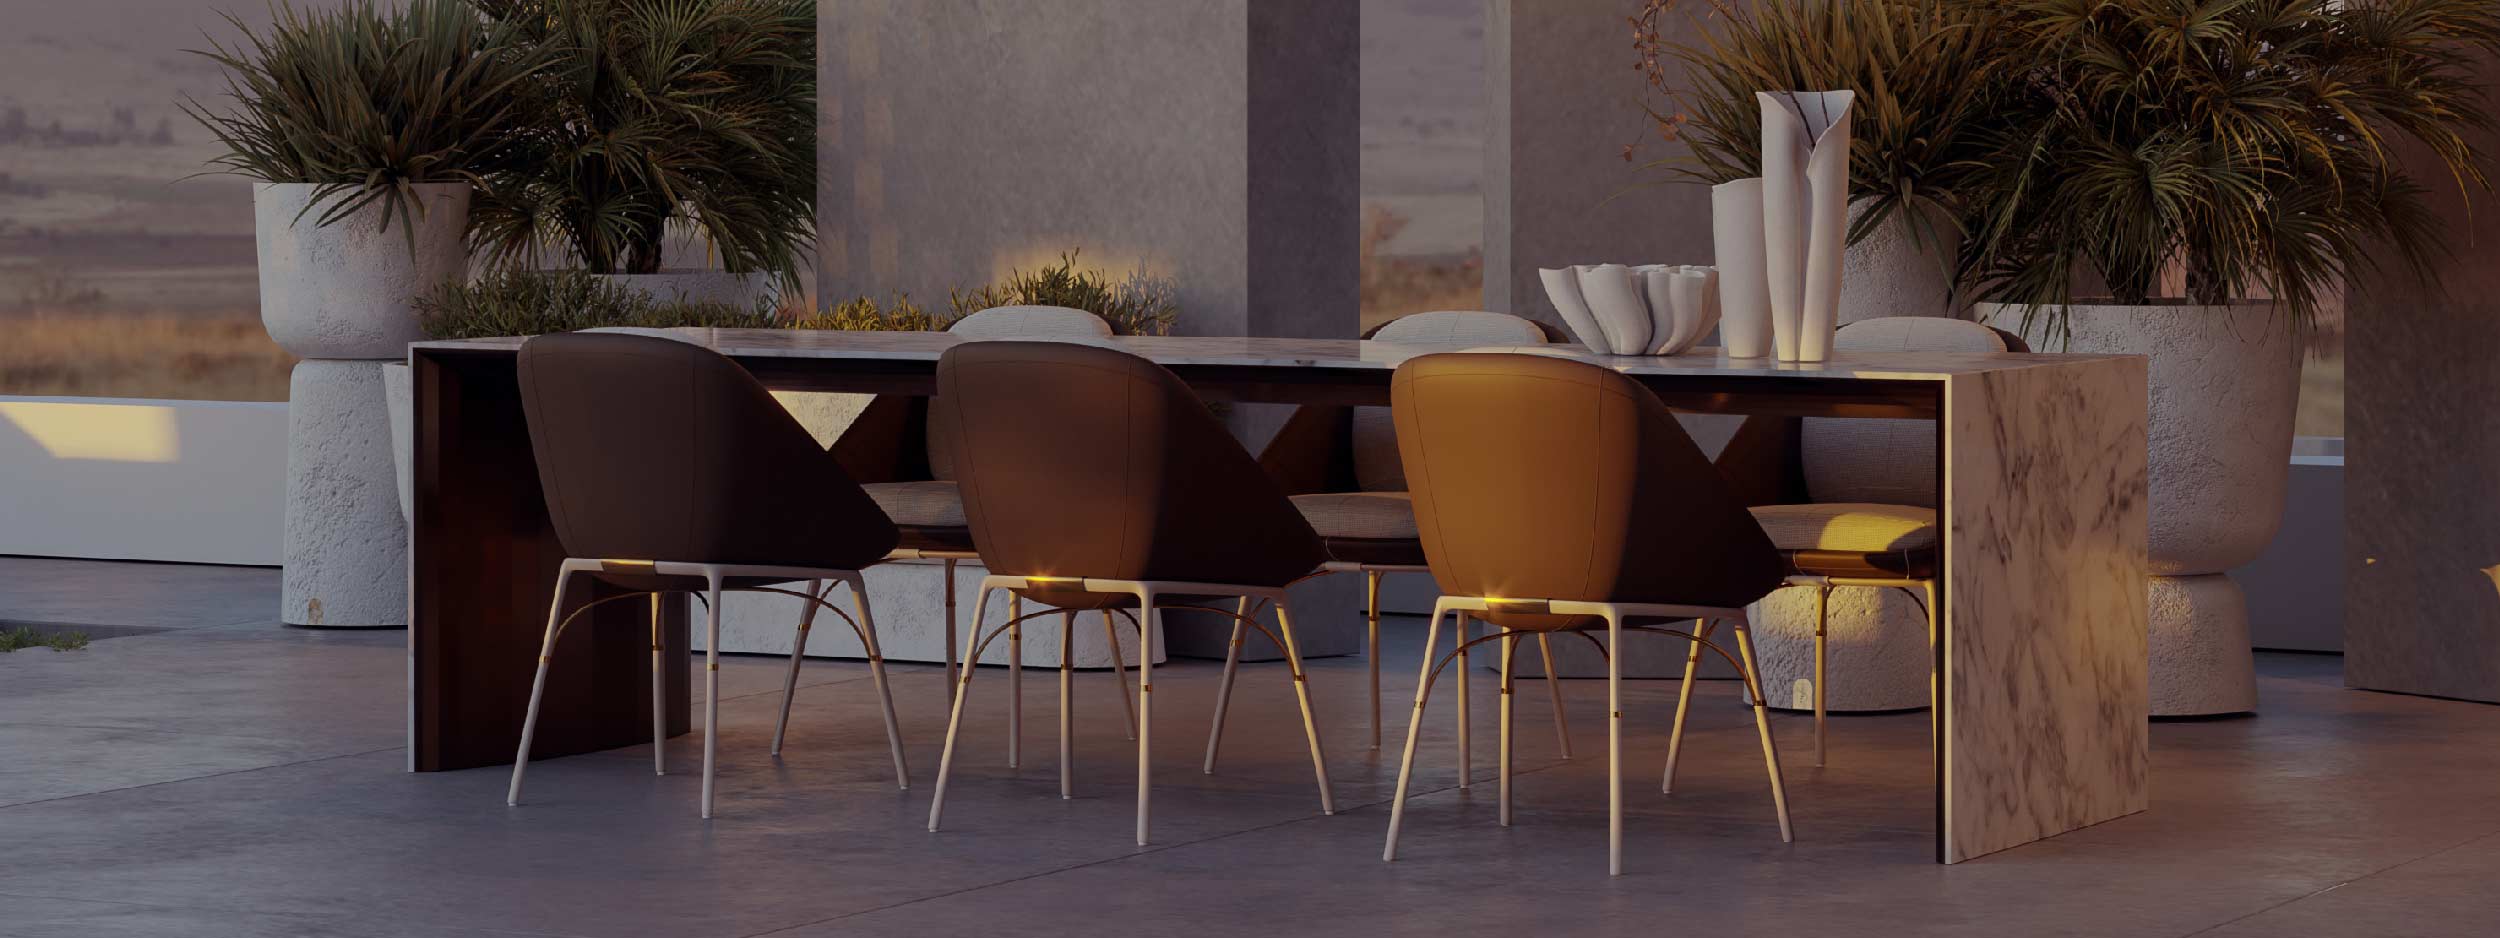 Image of Zest luxury garden table and Nero dining chairs by Myface